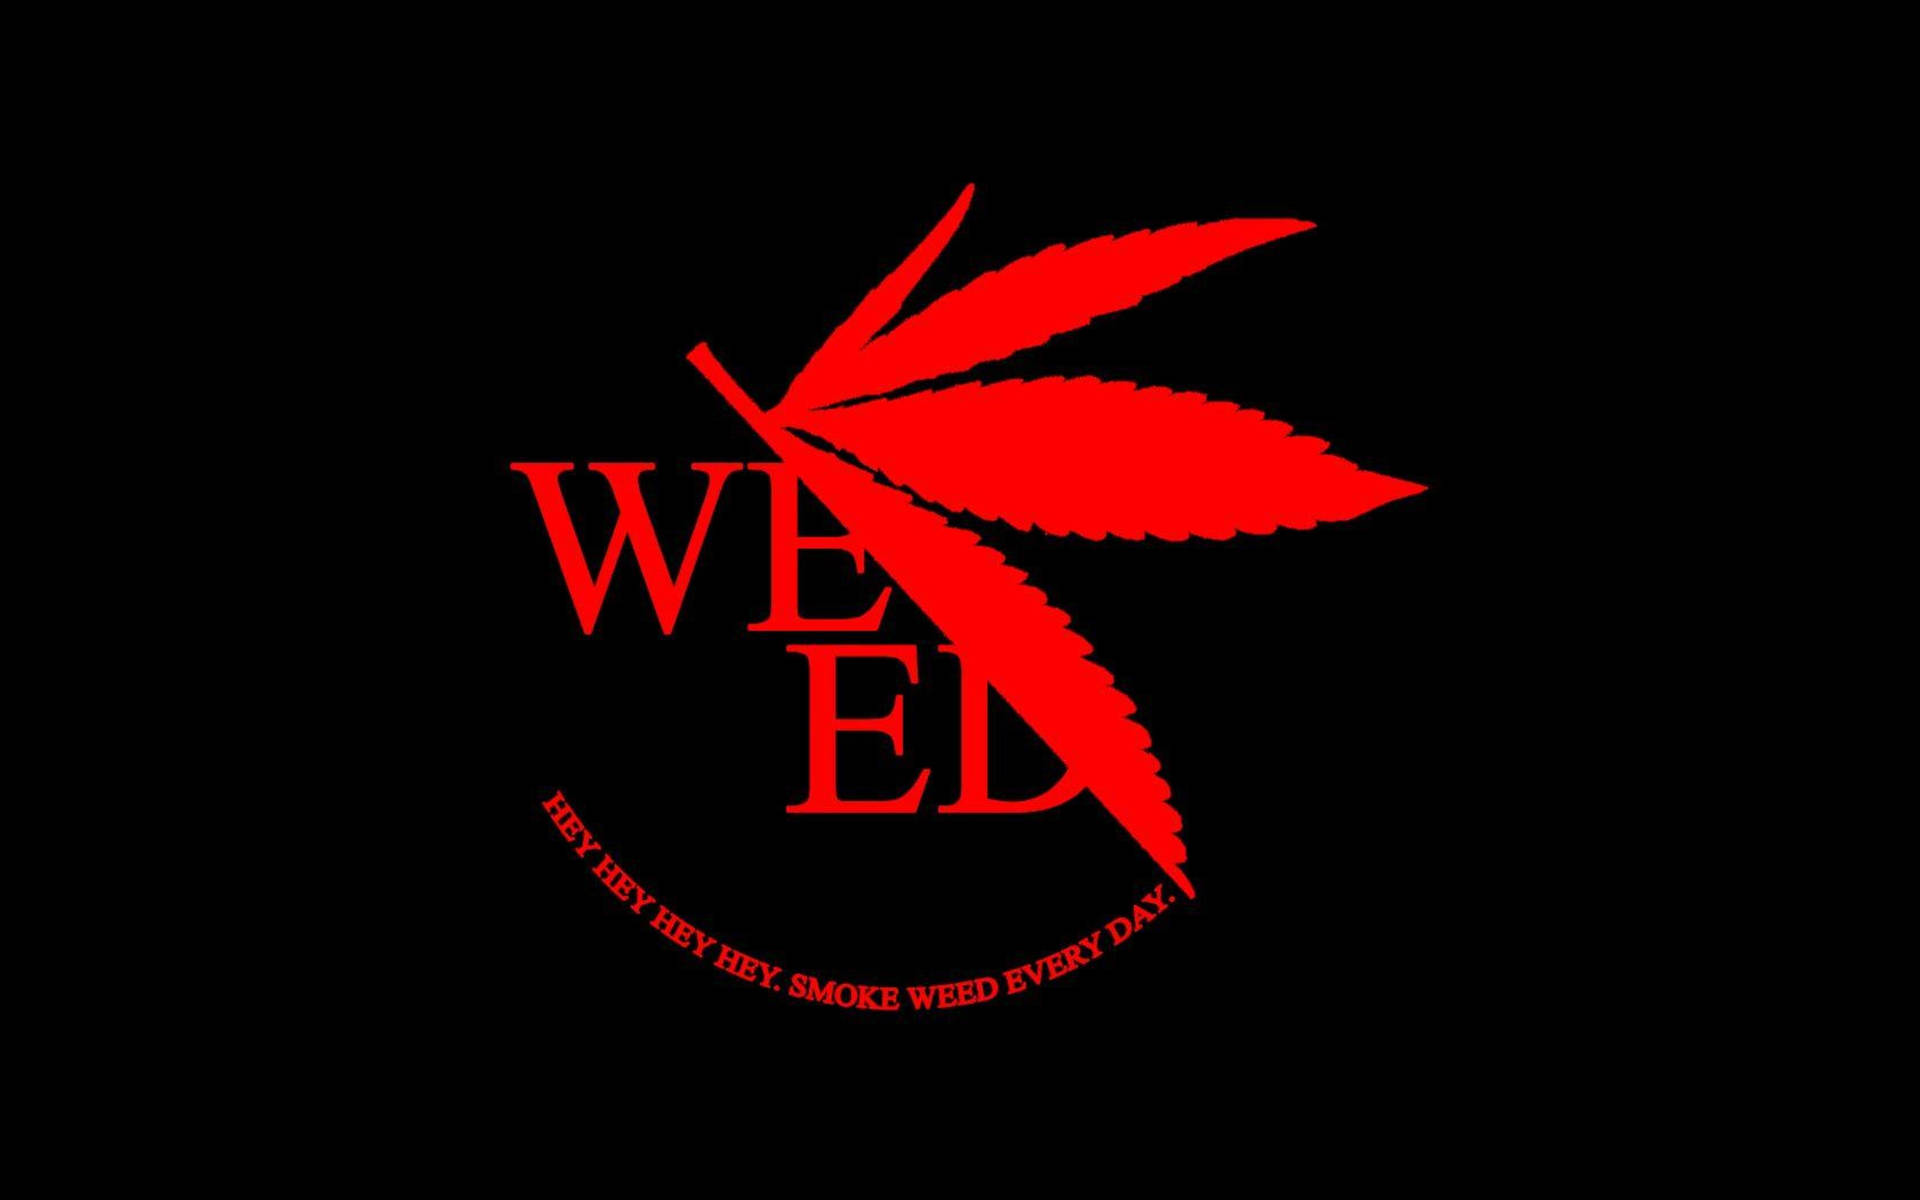 Get Ready To Blaze With This Bountiful Red Weed Background